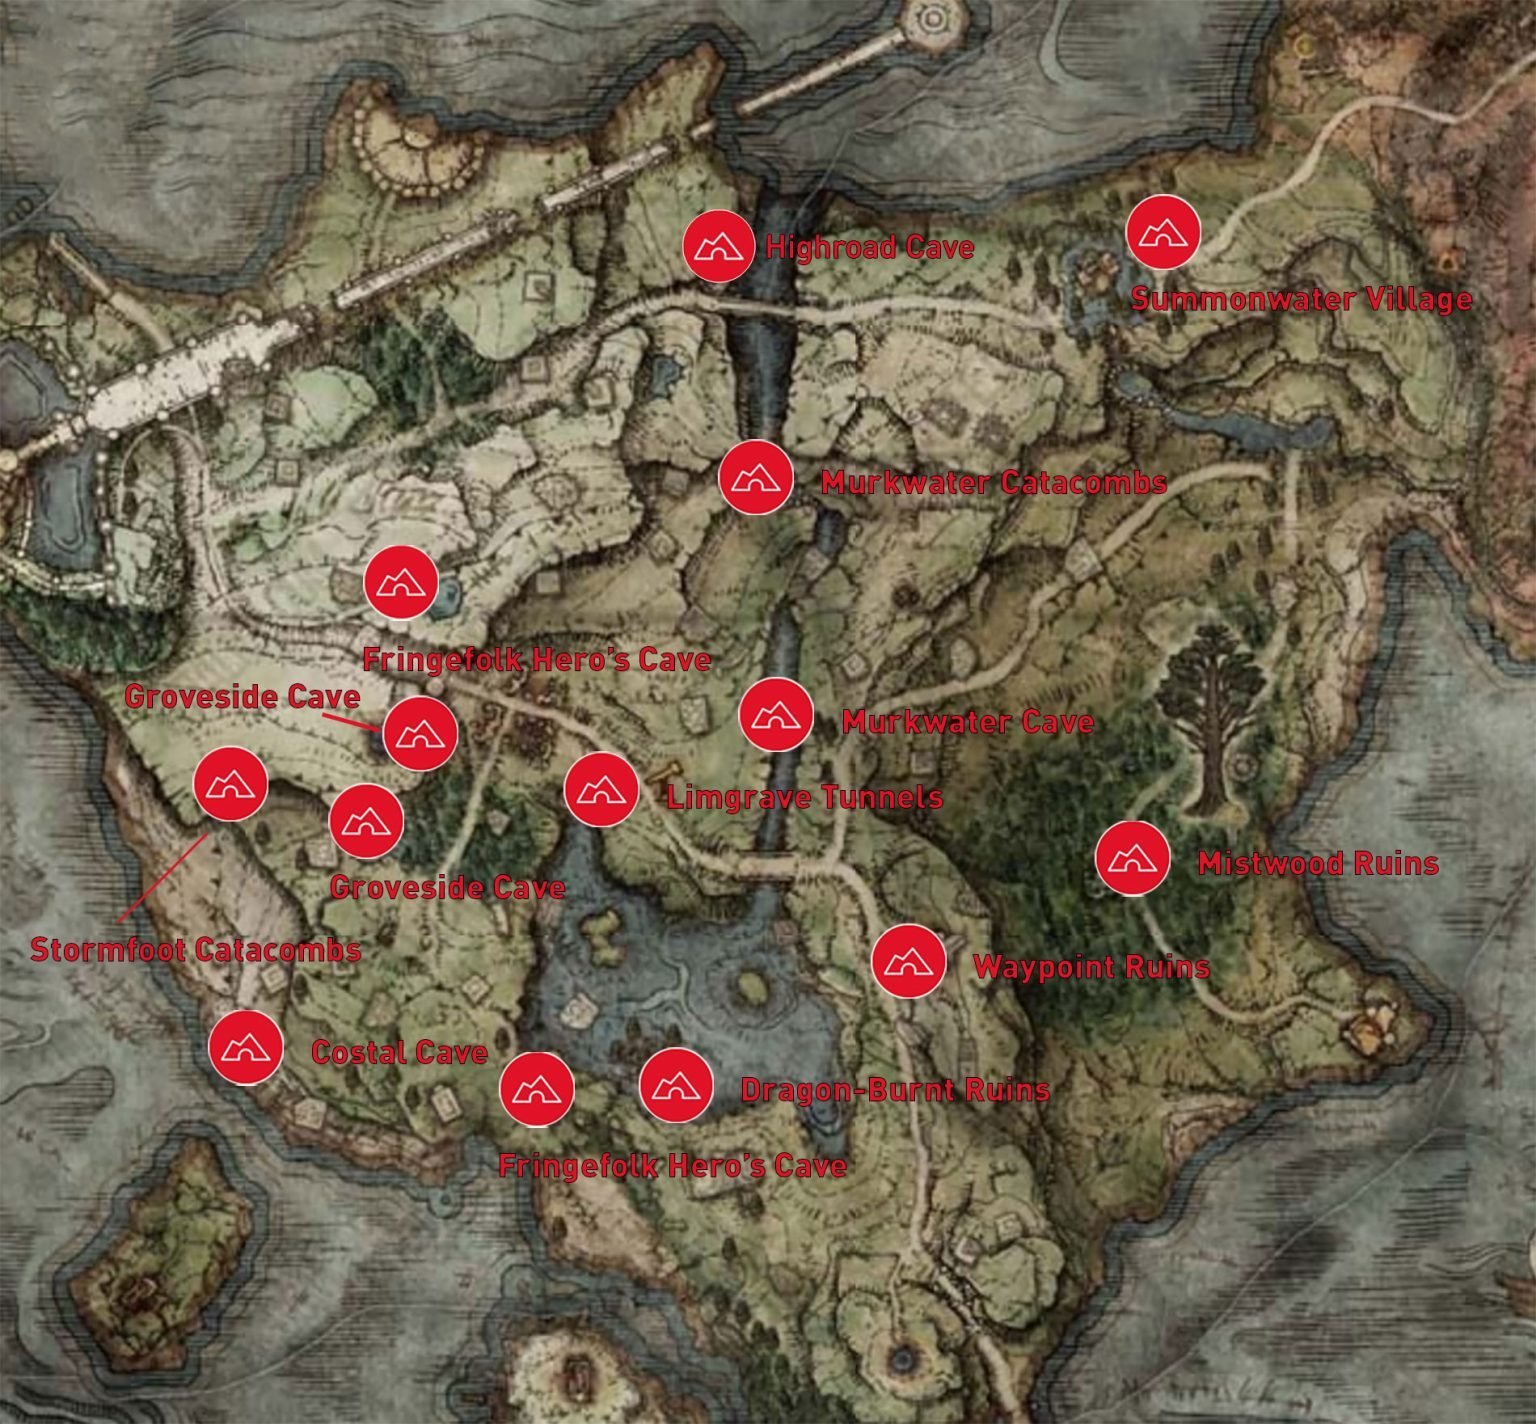 Guides Elden Ring Guide Limgrave Dungeon Locations 1536x1424 